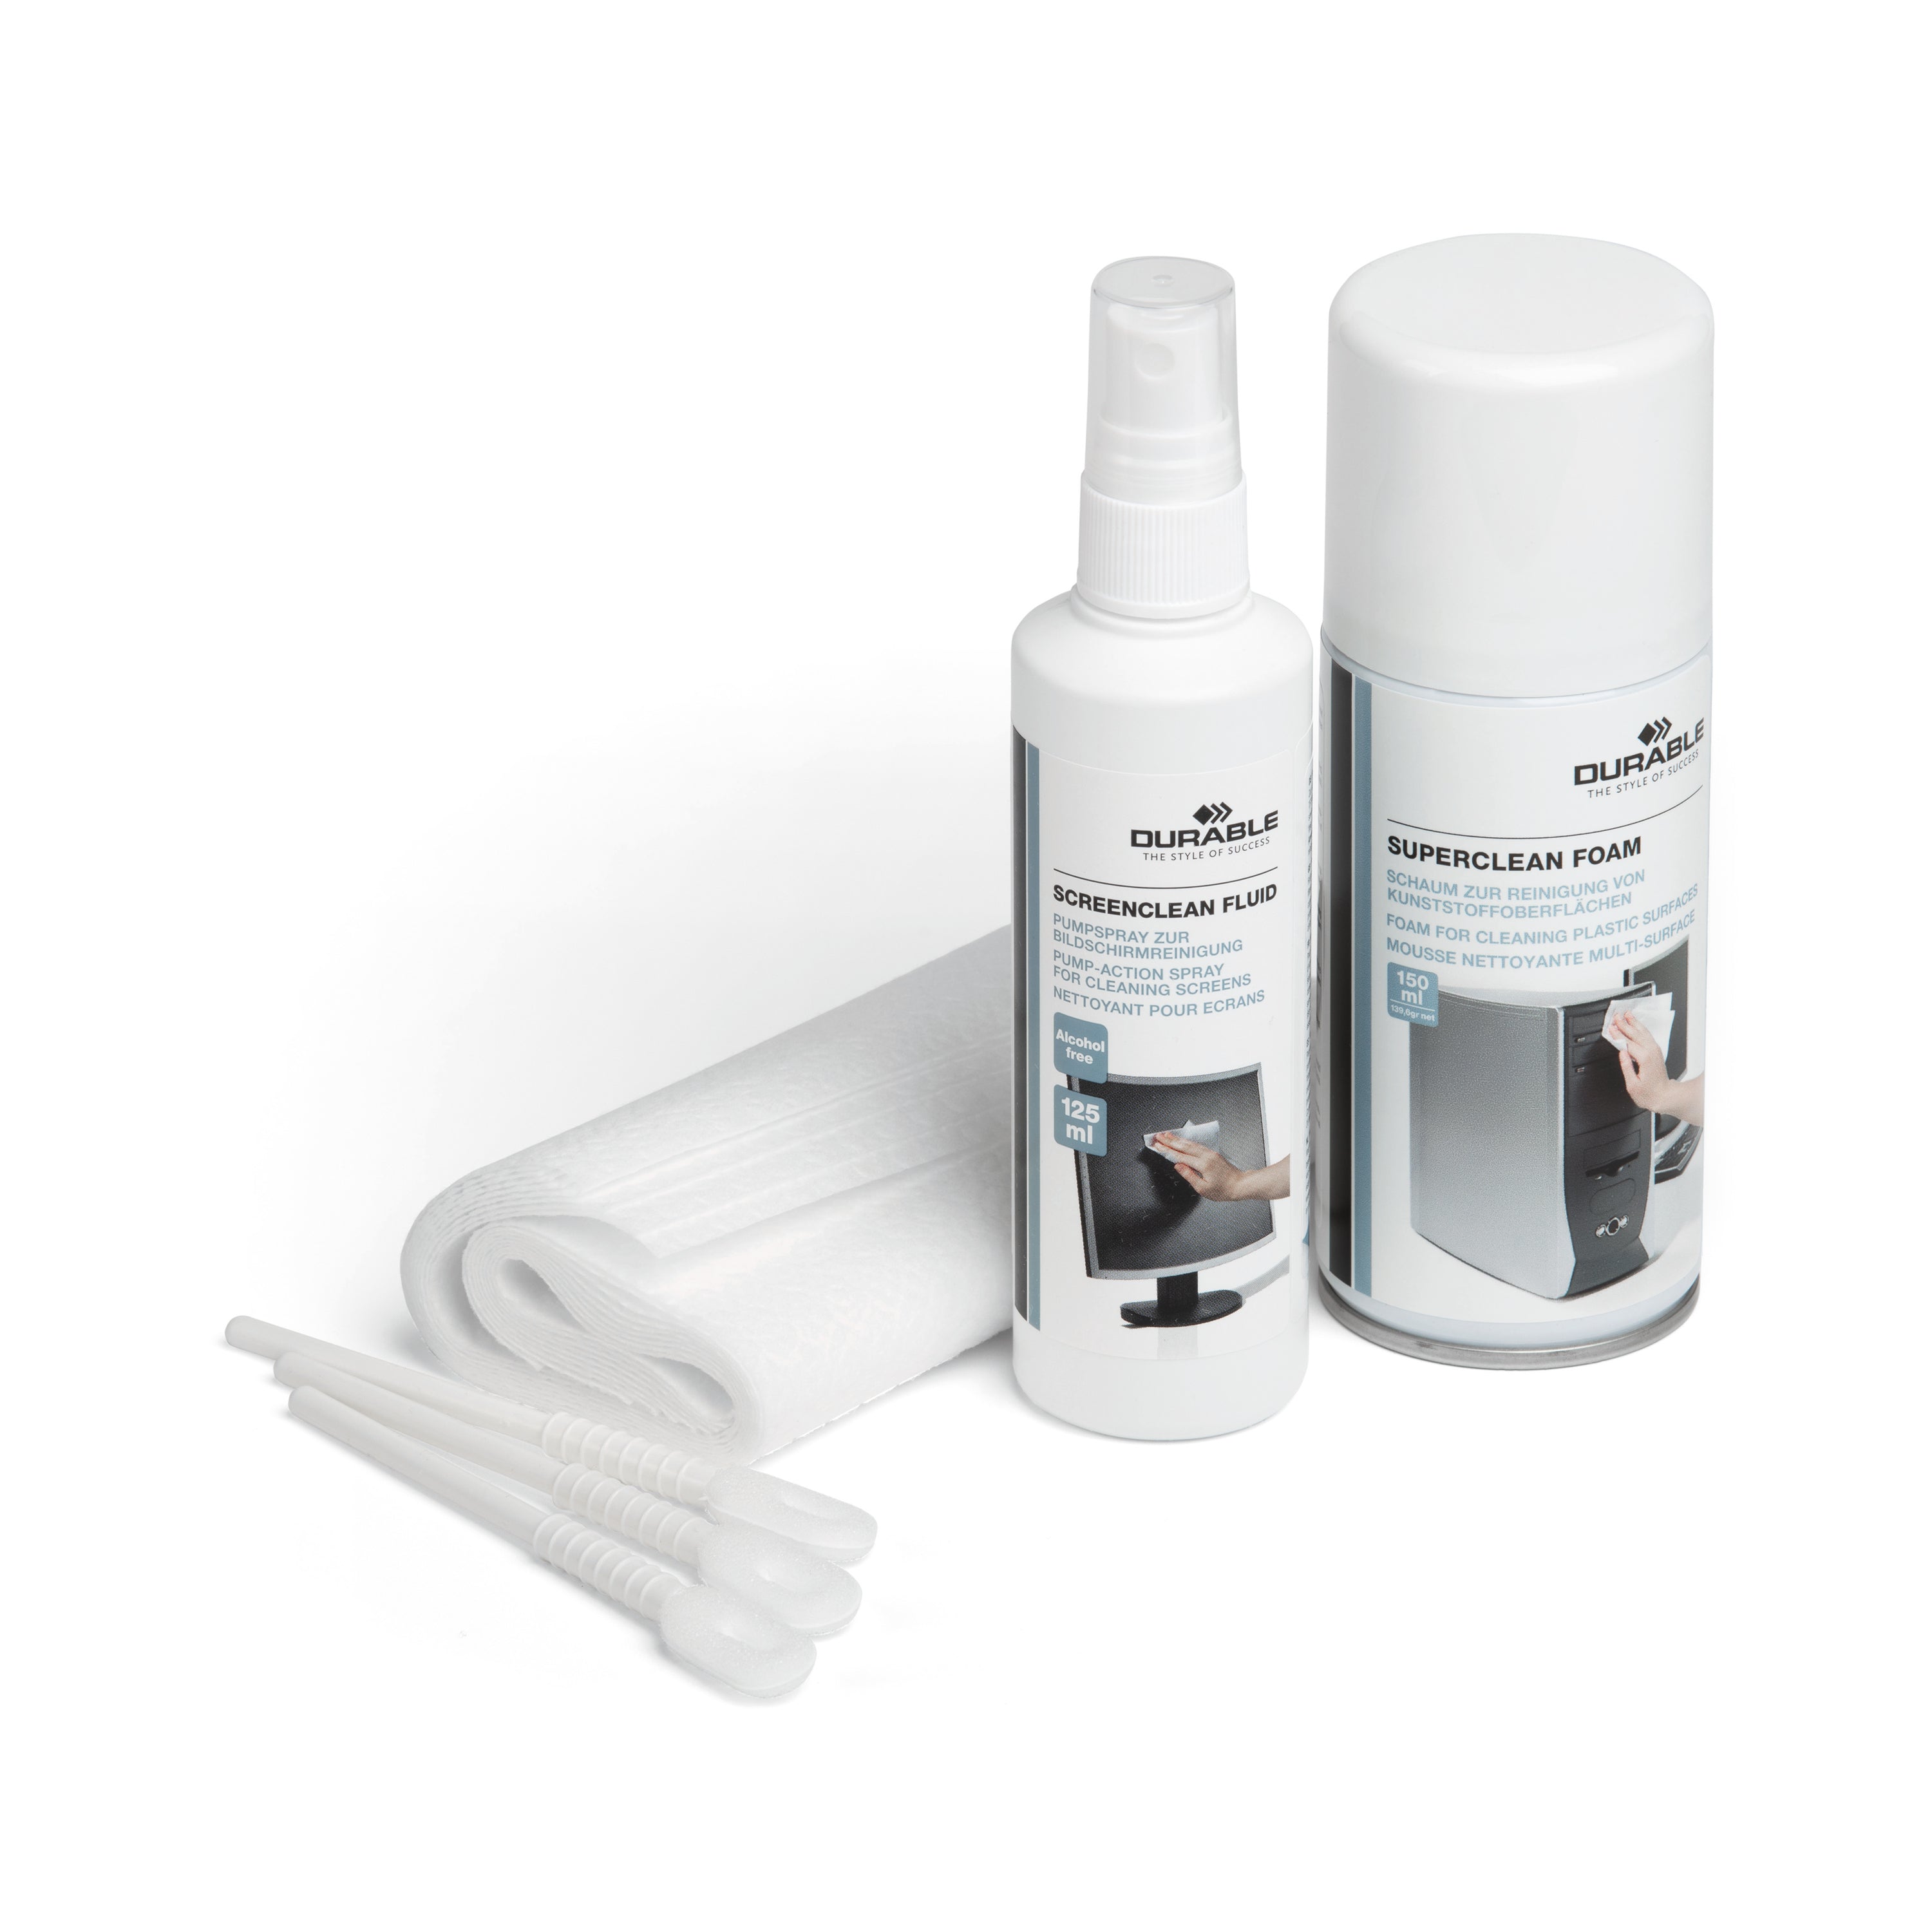 Durable PC Cleaning Kit Contains Cleaning Foam/Fluid/Spray Wipes Keyboard Cleaner 583400